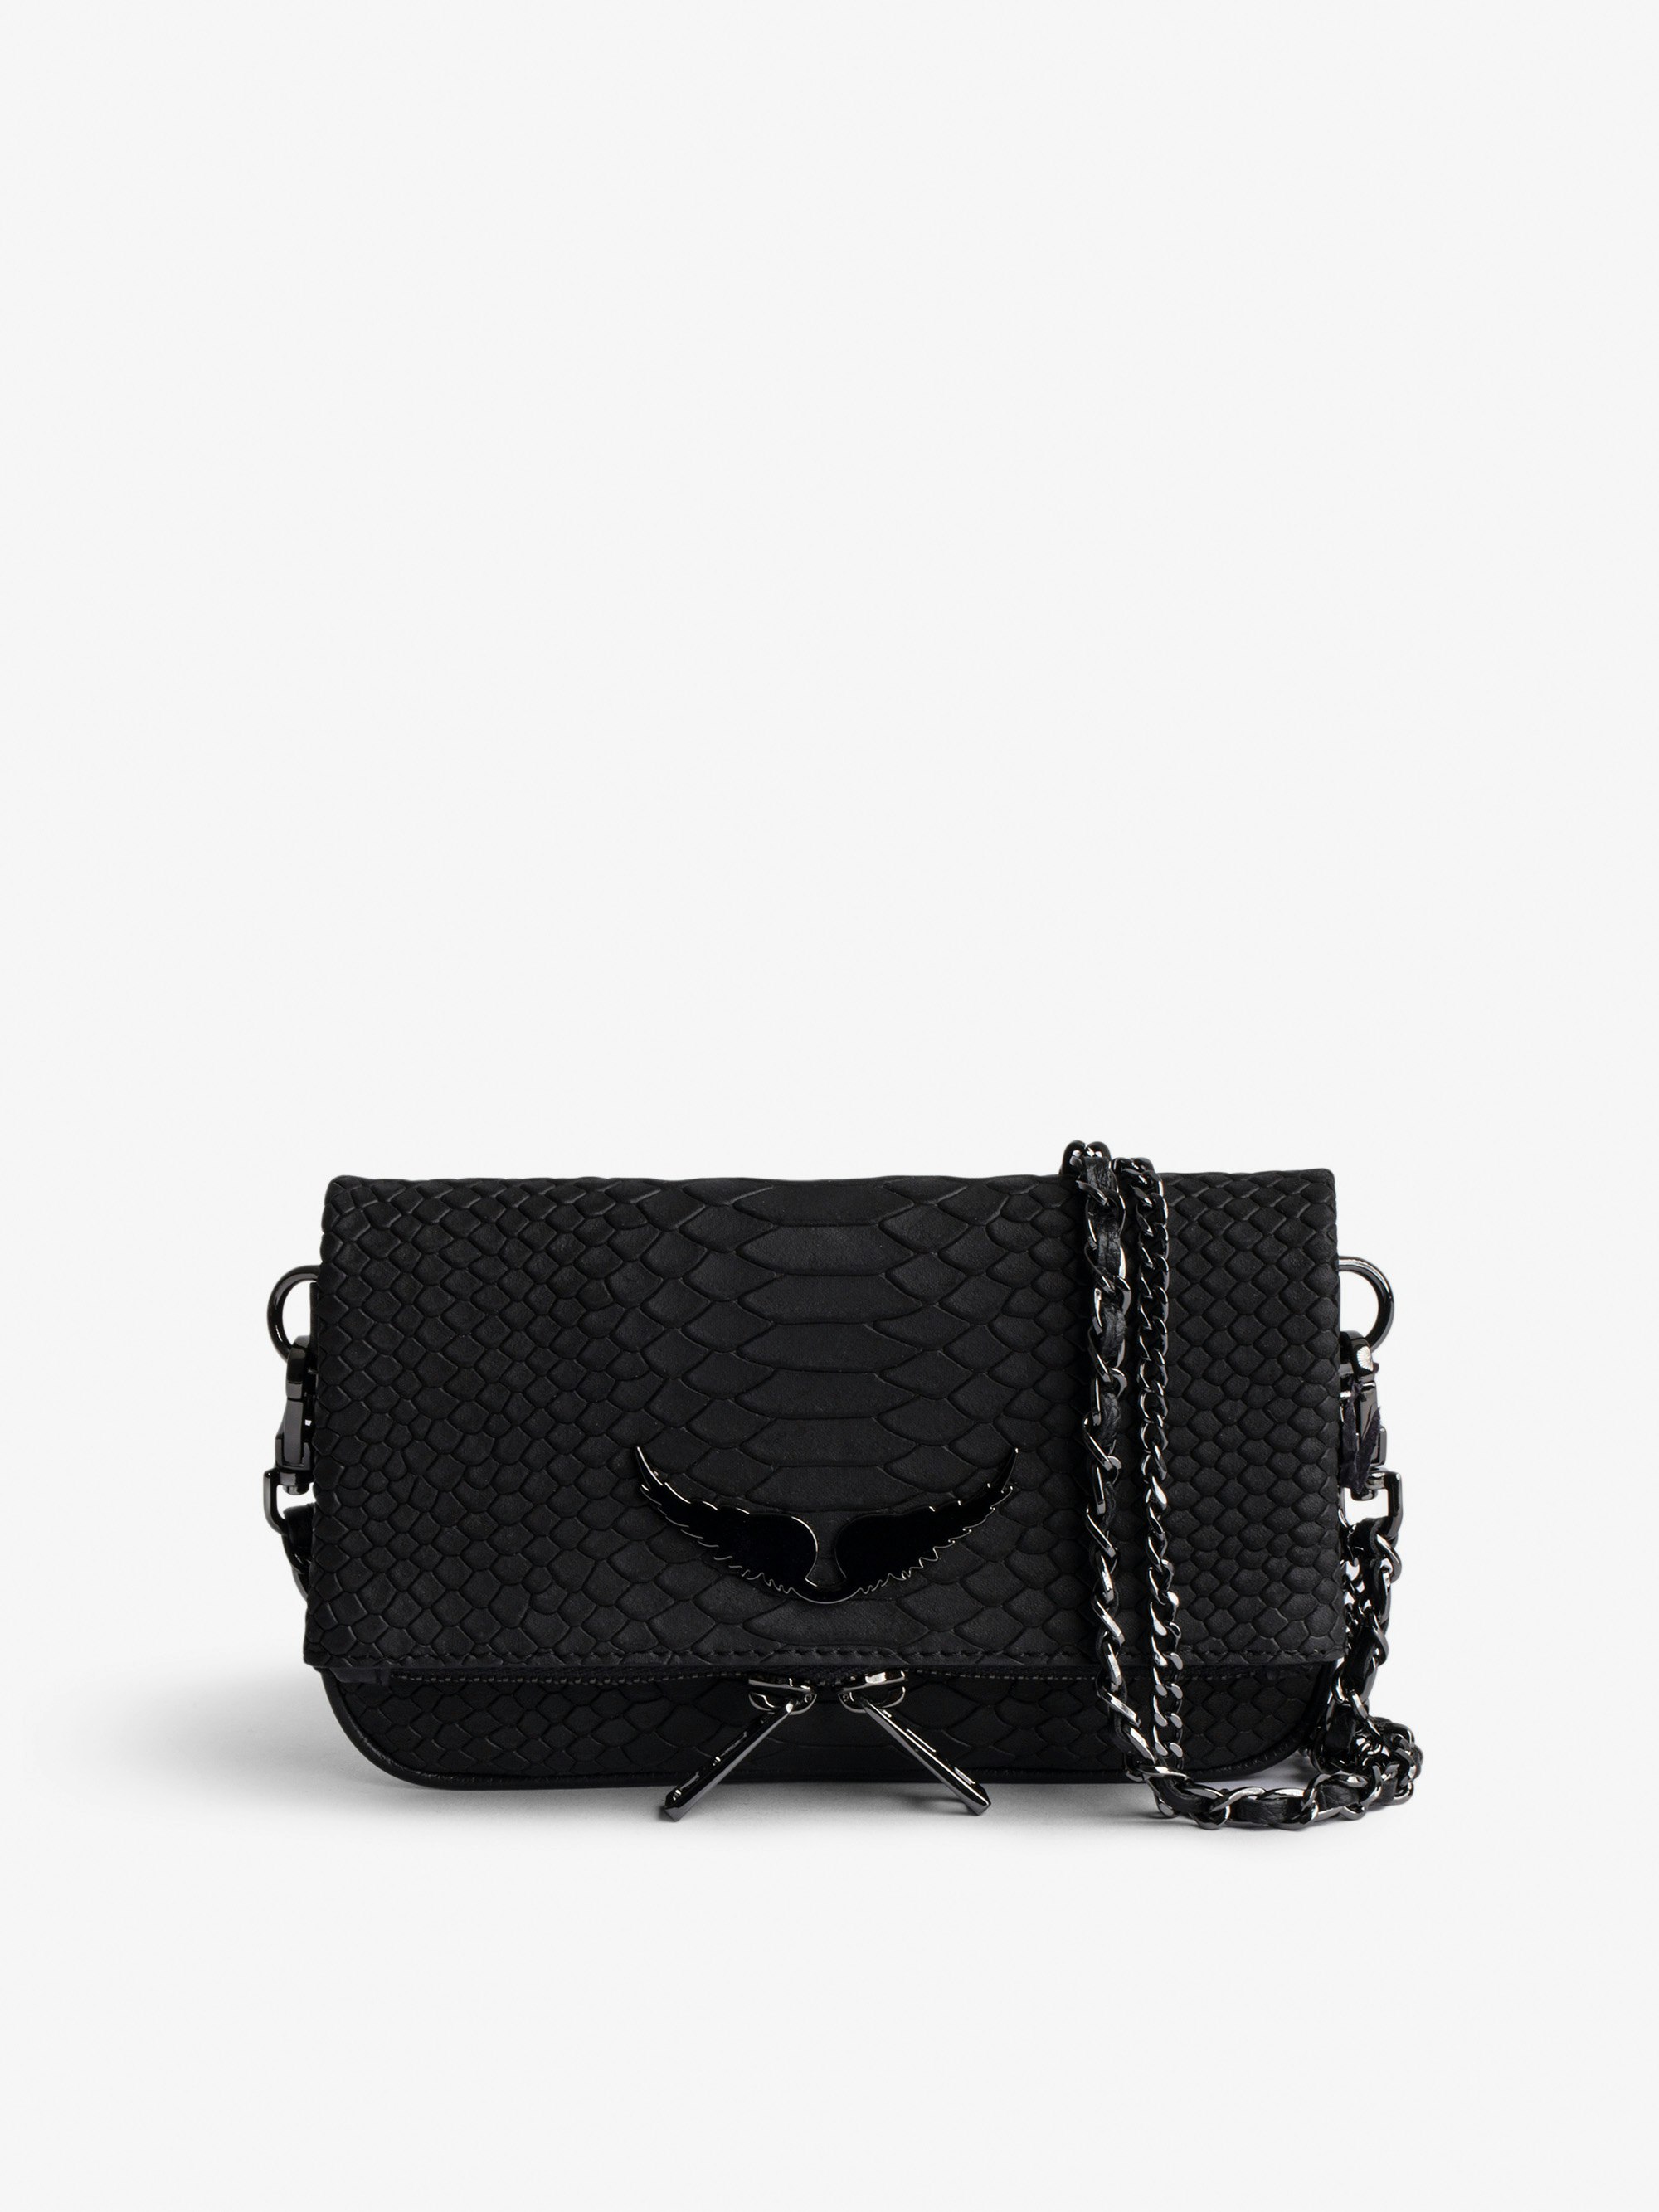 Nano Soft Savage Rock Clutch - Women’s small clutch in black python-effect leather with double leather-and-metal chain